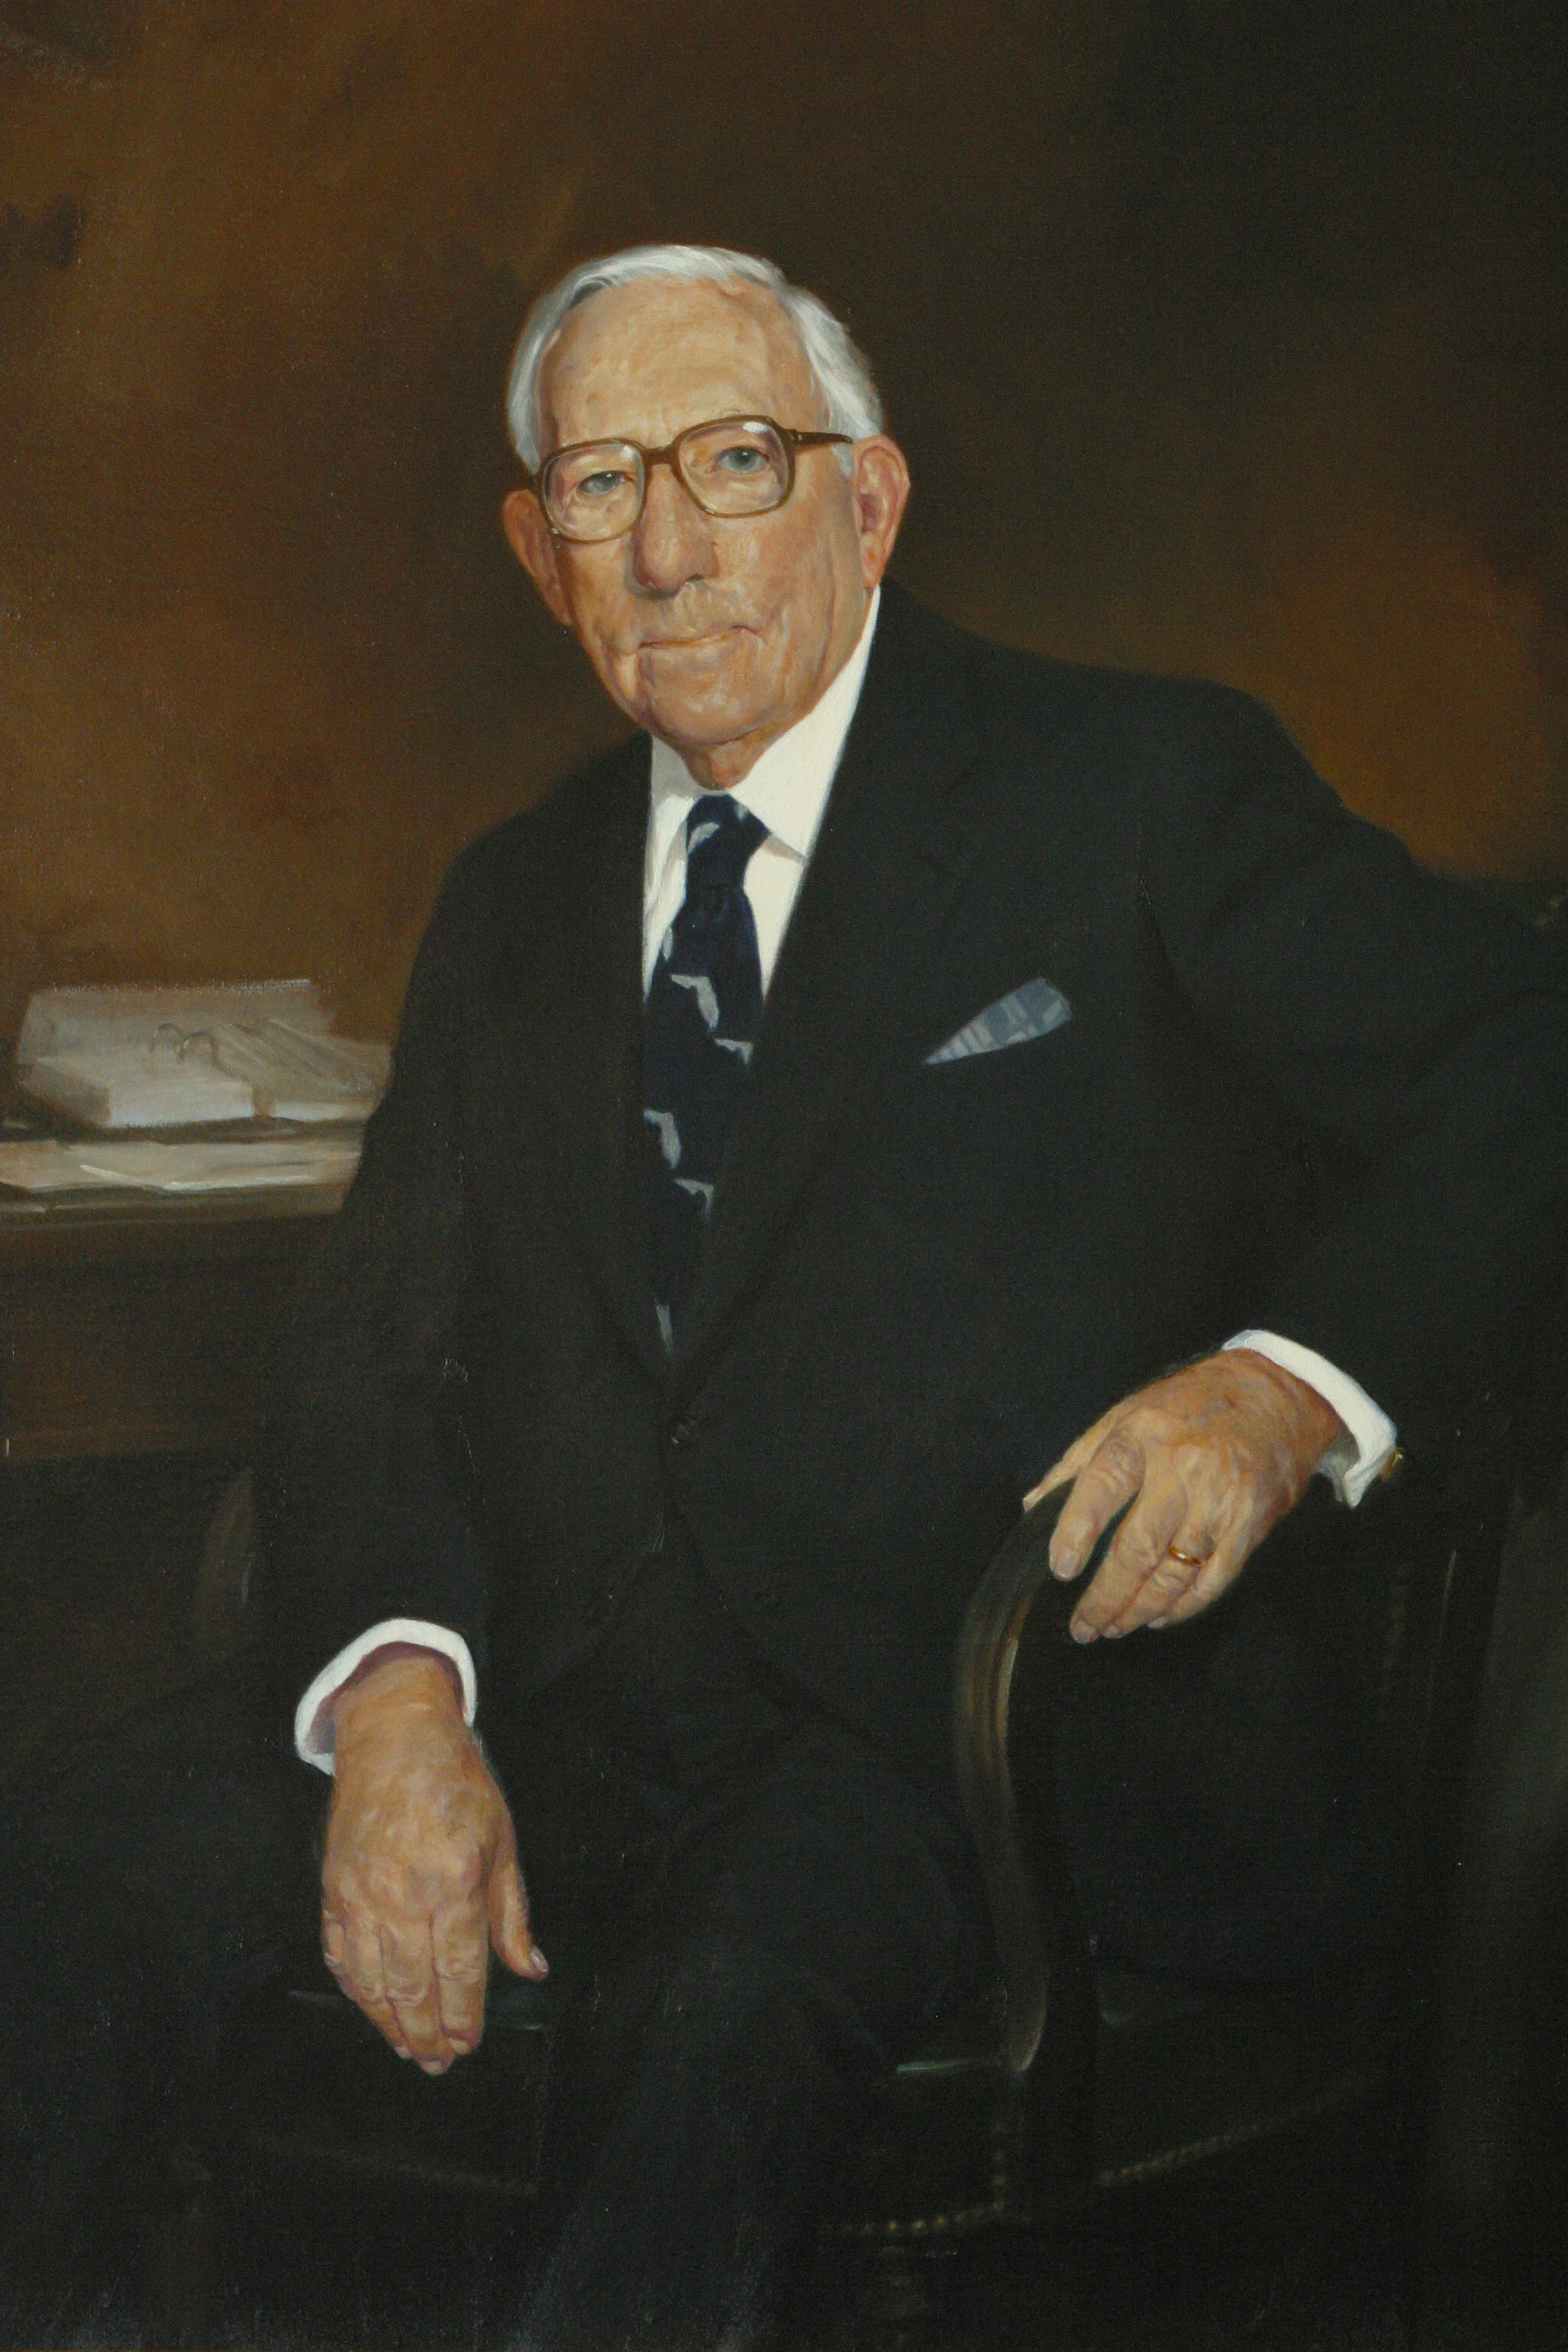 Portrait of Pepper in the Collection of the U.S. House of Representatives